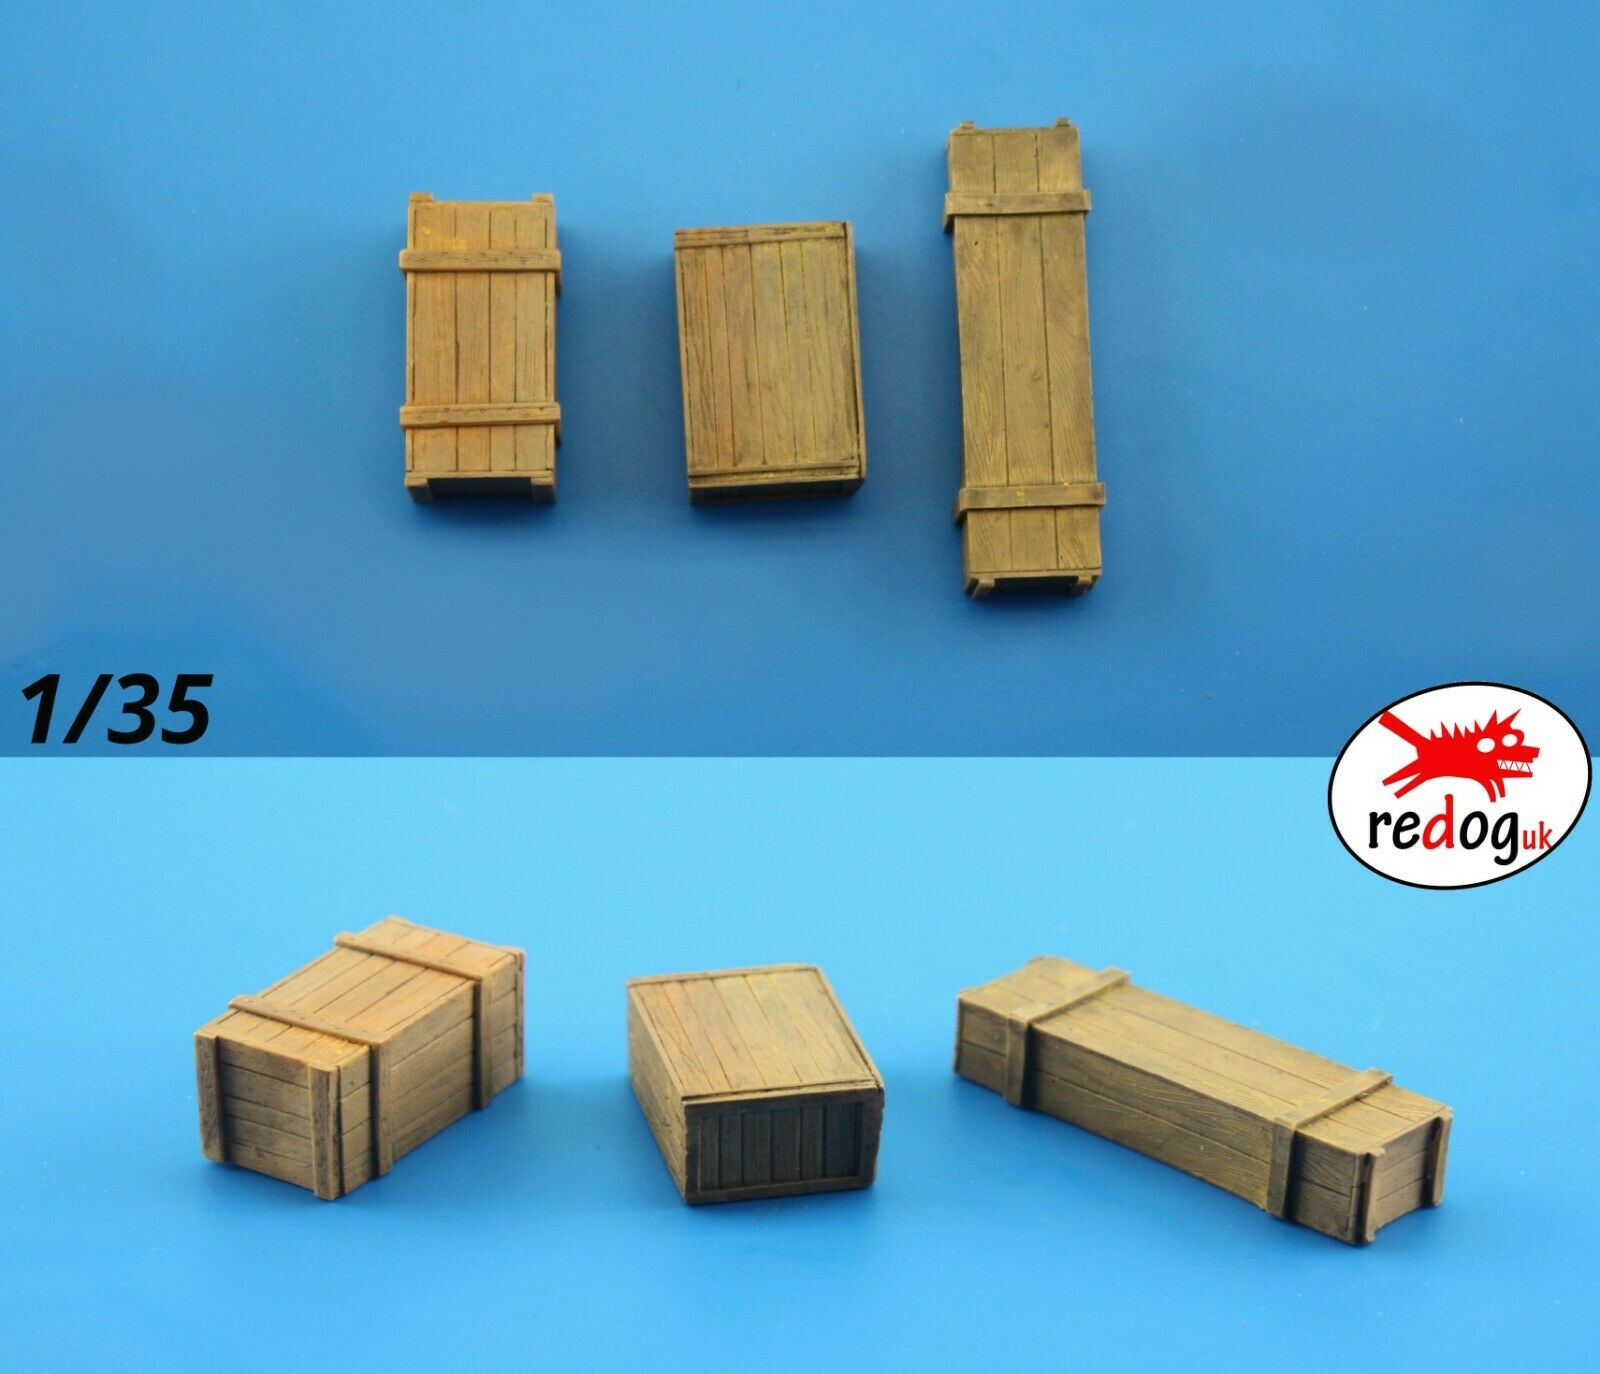 1/35 3 Boxes and Crates  - Military Scale Model Stowage Diorama Accessories Kit 8 - redoguk